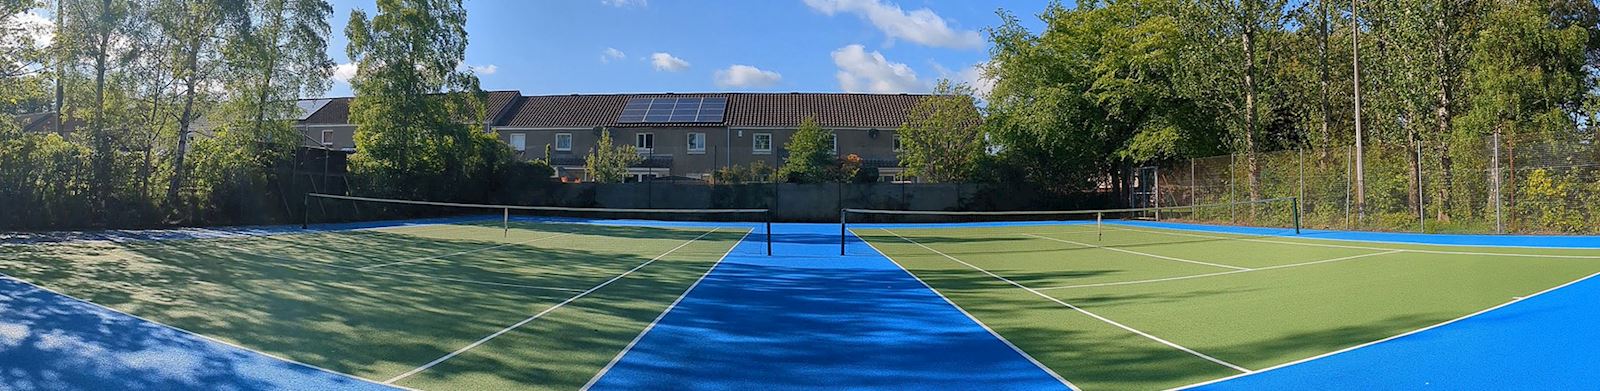 Ladywell Community Tennis Courts